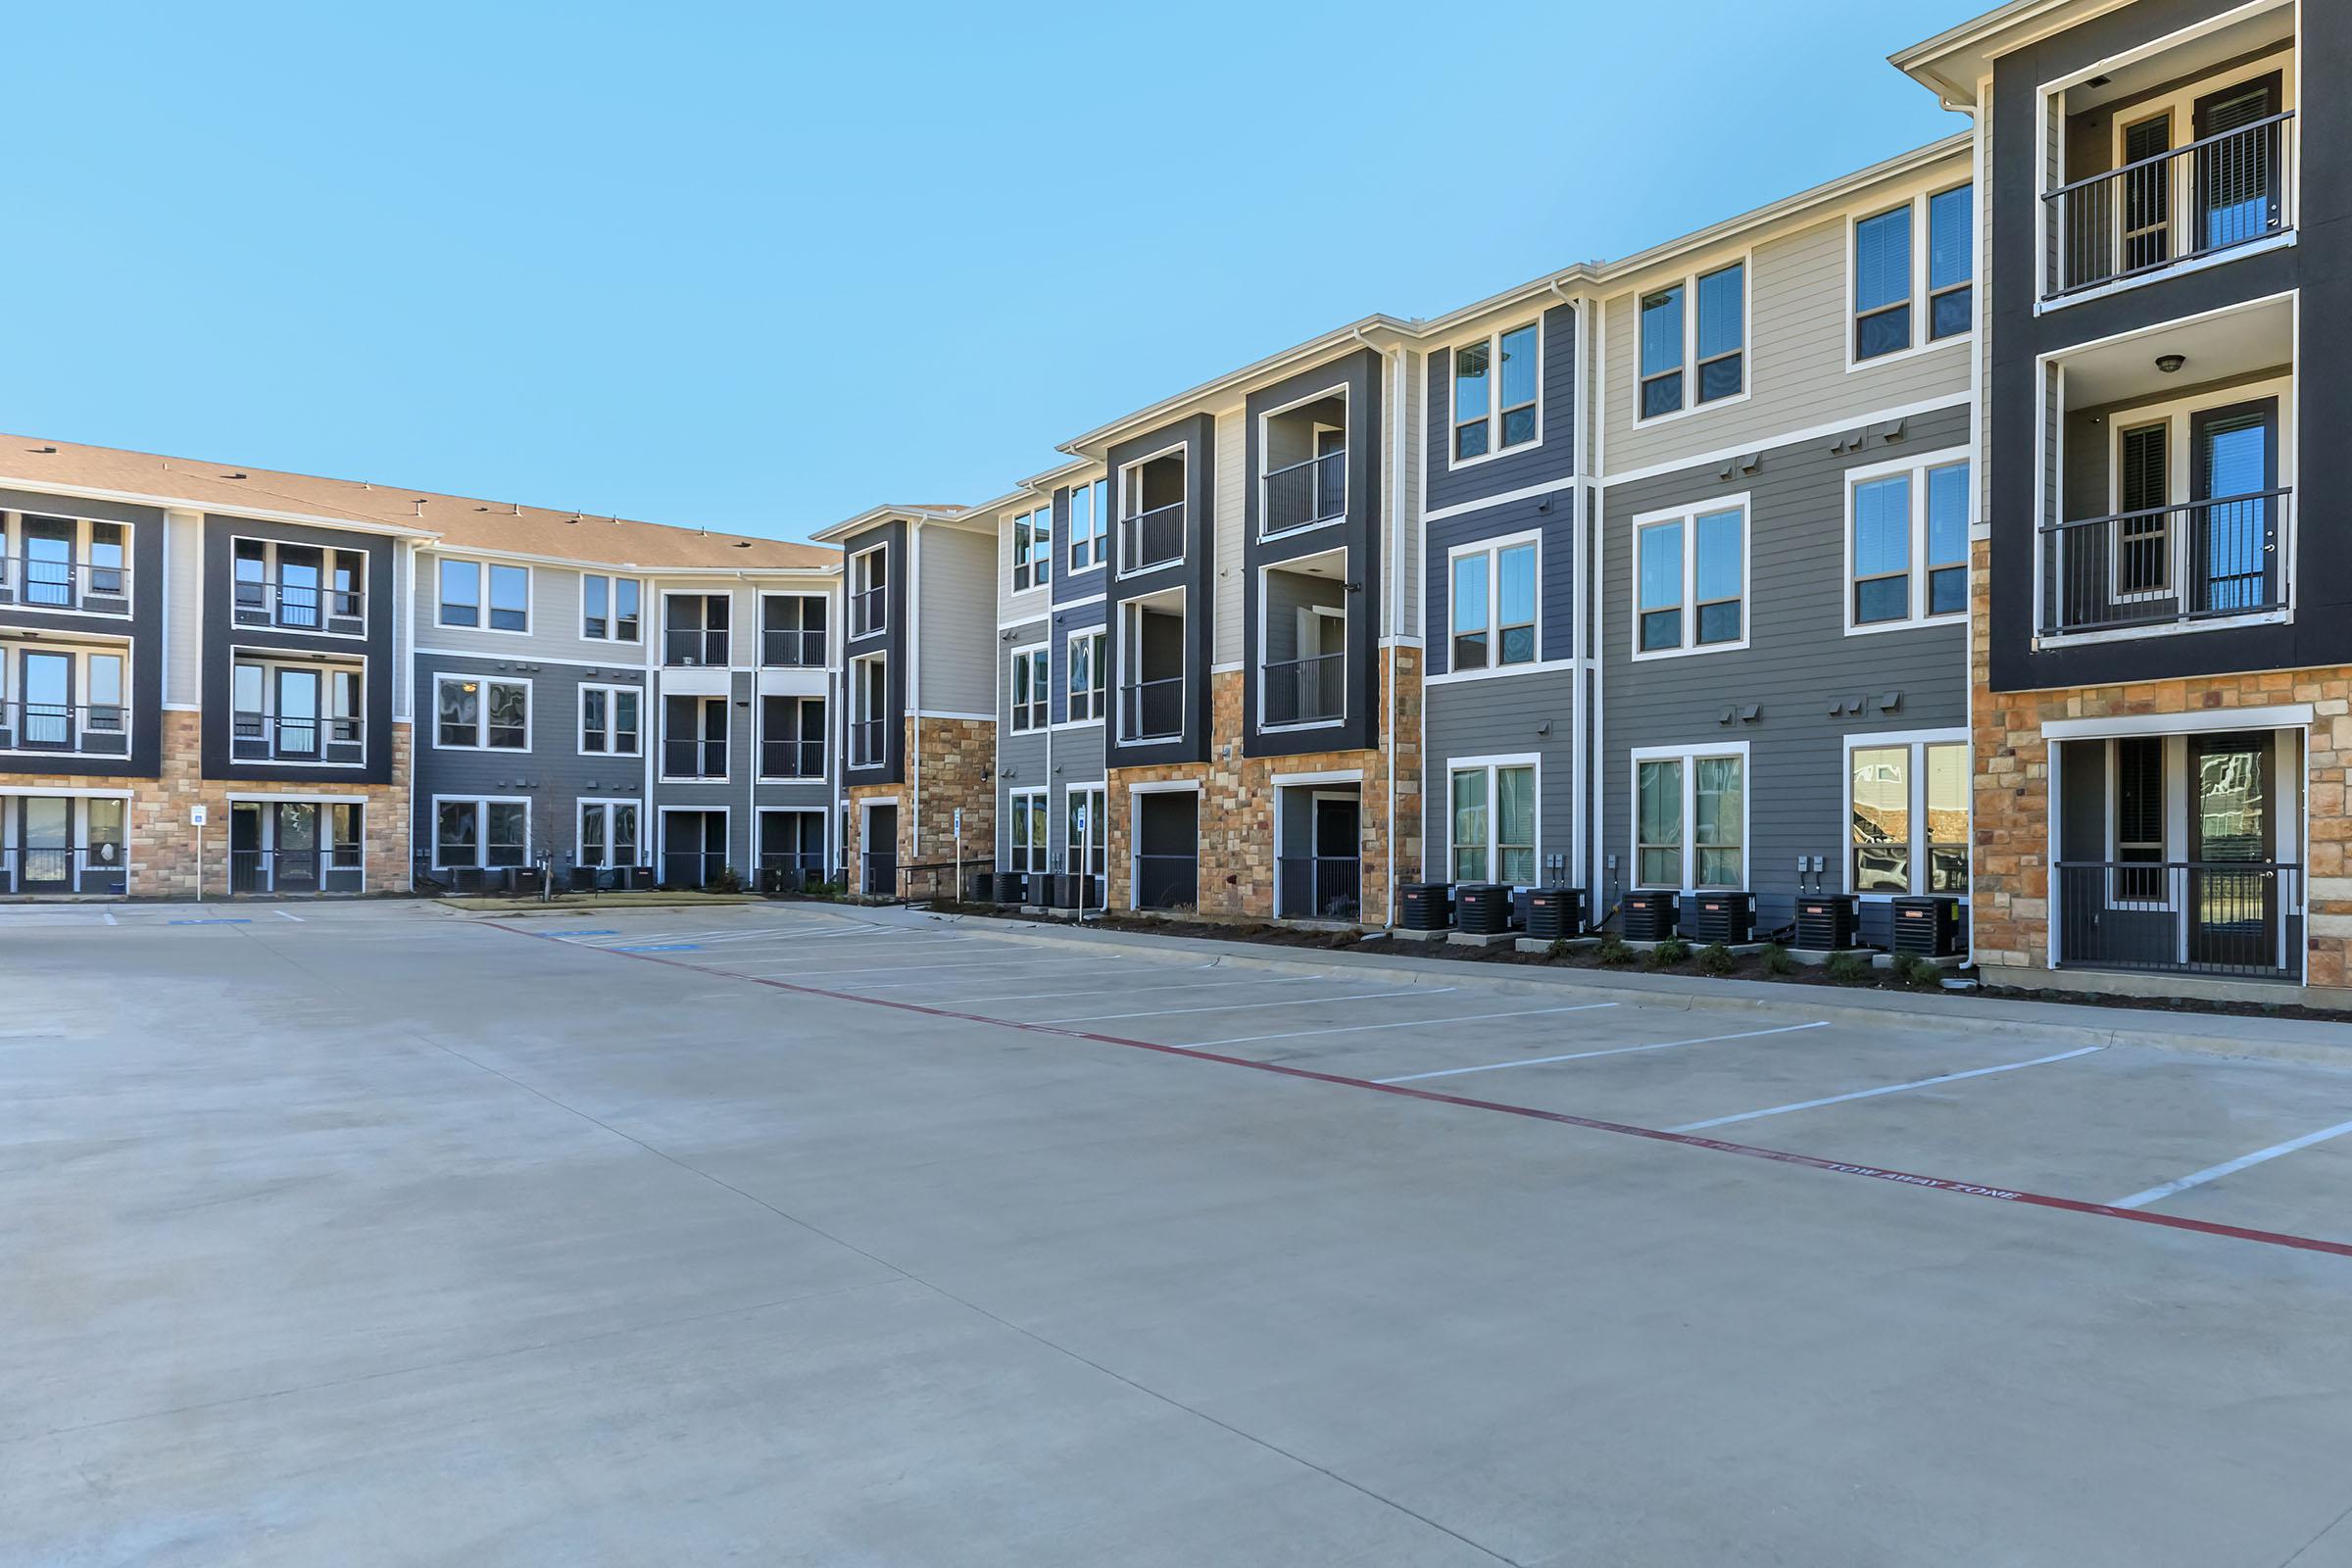 BRAND NEW APARTMENTS FOR RENT IN AUSTIN, TX